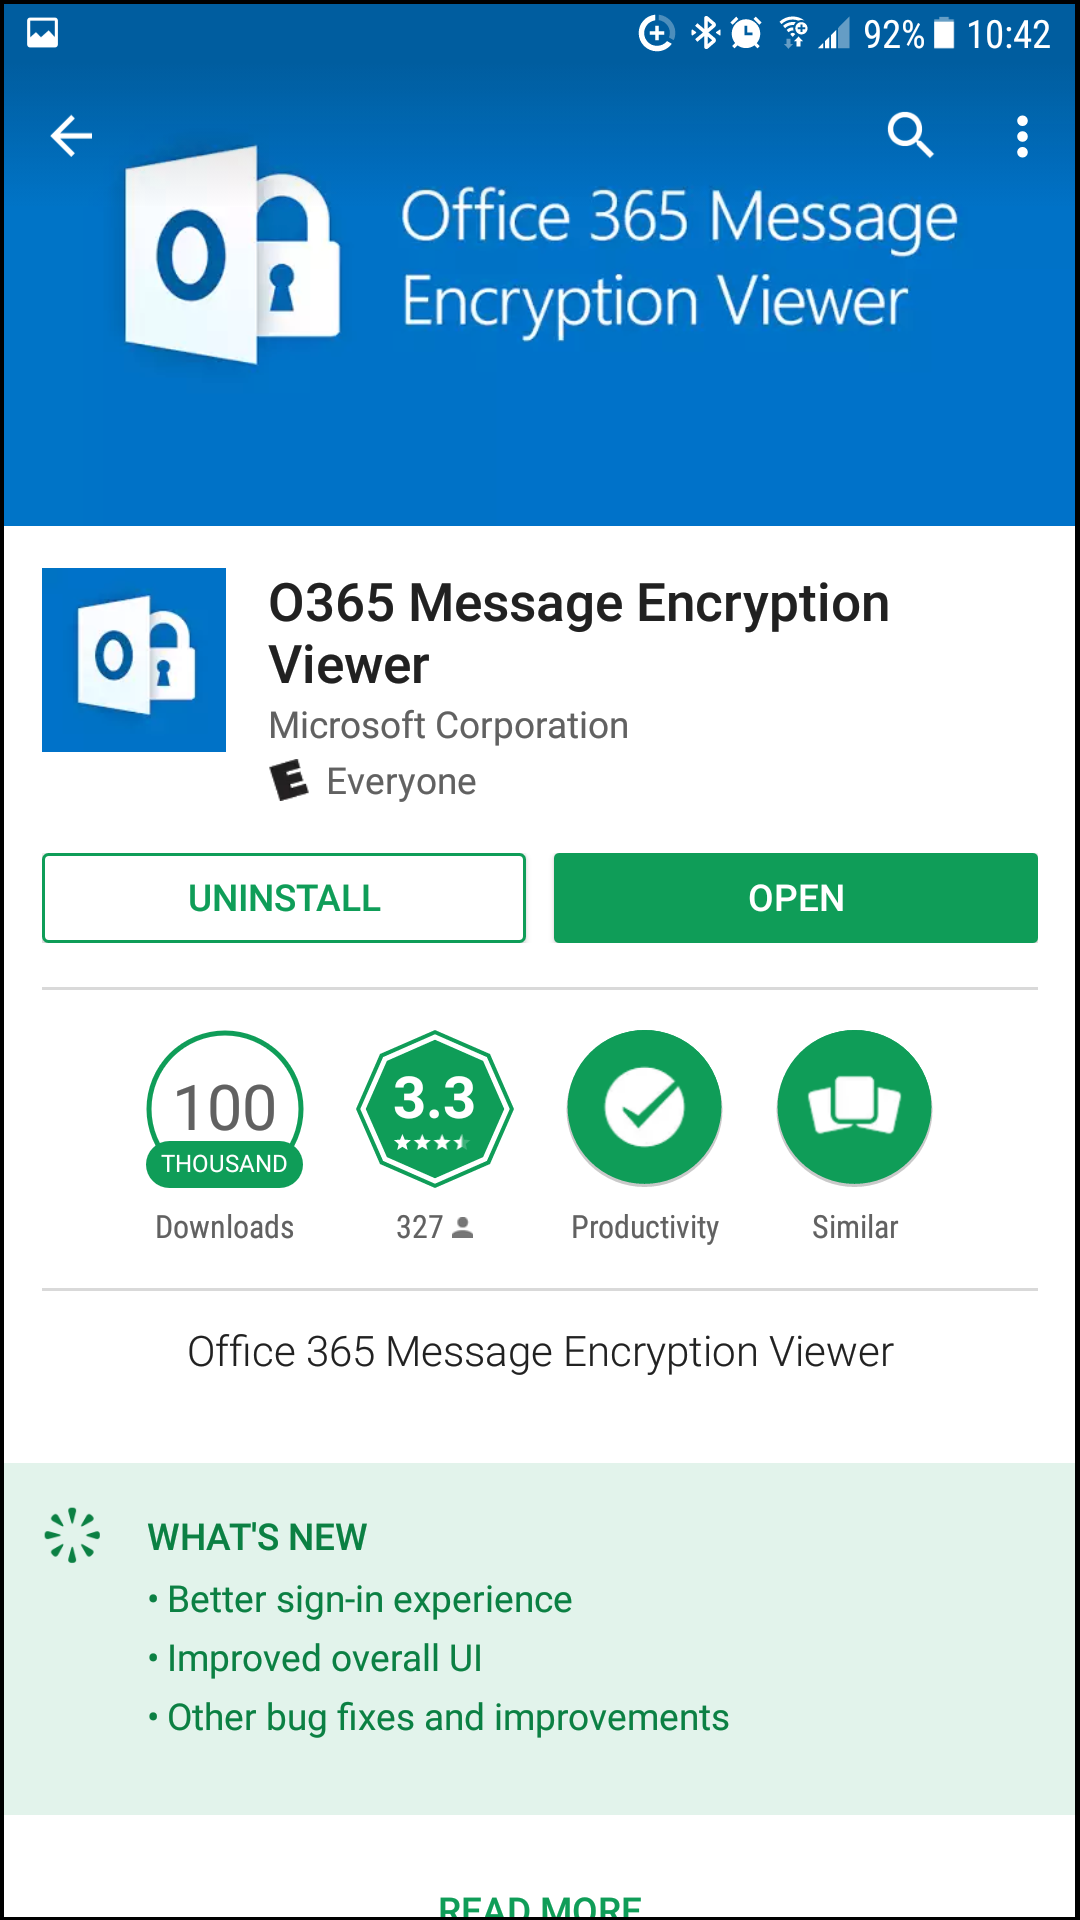 Office 365 Message Encryption Viewer (OME)